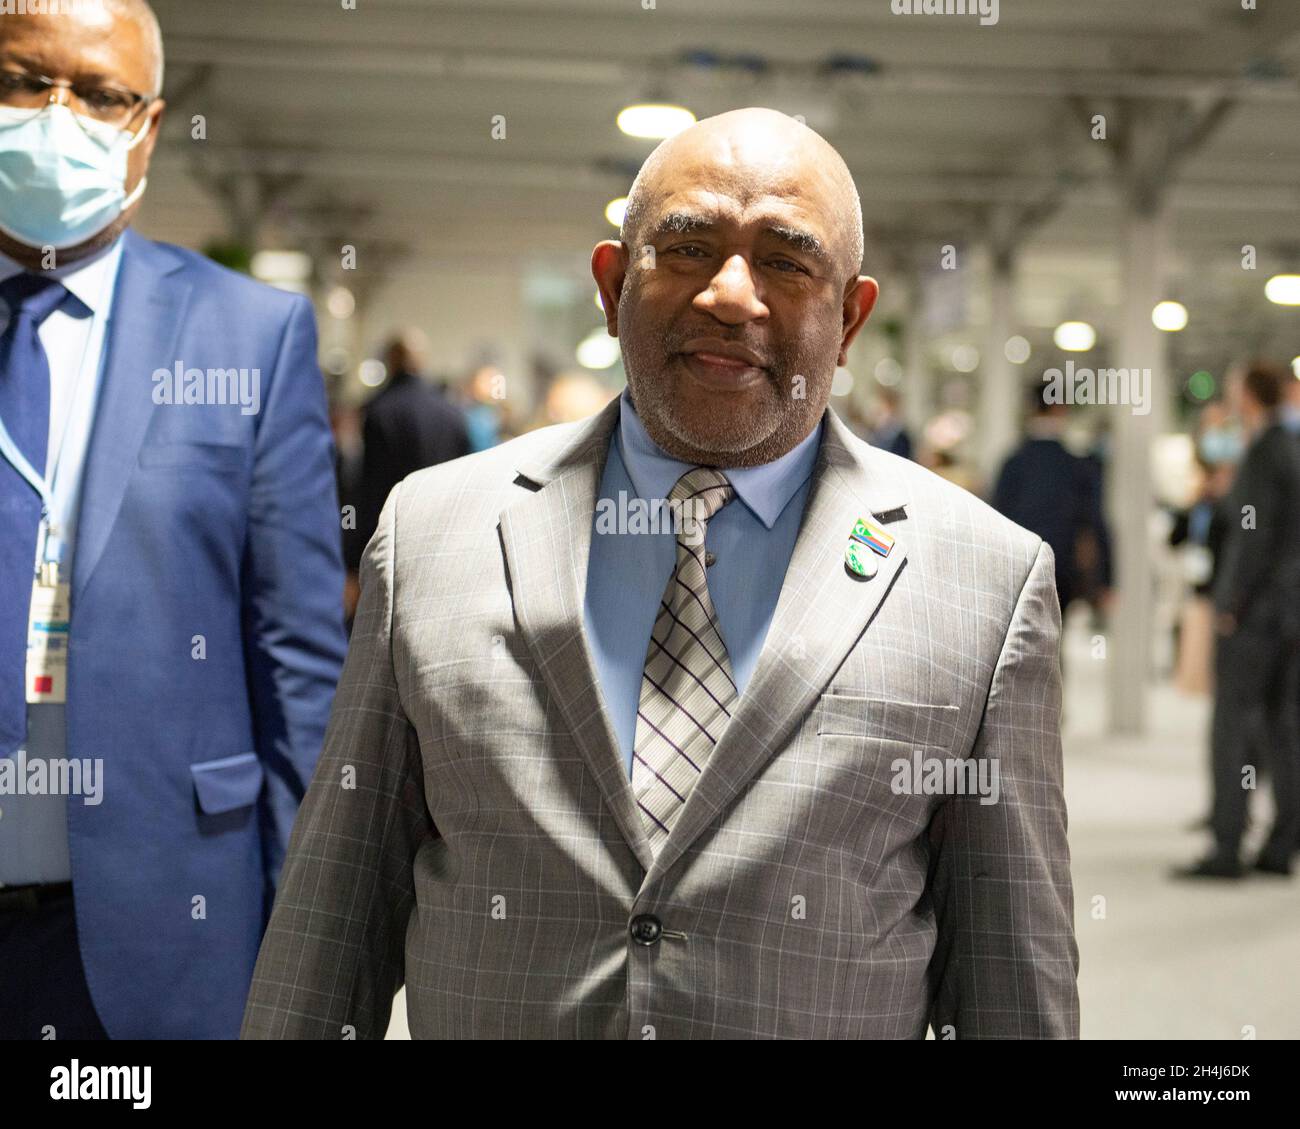 Glasgow, Scotland, UK. 2 November 2021 PICTURED: President Azali Assoumani, President of the Comoros seen at COP26. Azali Assoumani (Arabic: غزالي عثماني; born January 1, 1959) is a Comorian politician who is the current President of the Comoros, in office since 2016. Previously he was President from 1999 to 2002 and again from 2002 to 2006. He became leader of the Comoros on 30 April 1999 after leading a coup to depose acting president Tadjidine Ben Said Massounde, who he saw as pandering to the independence movement on Anjouan. He won multi-party elections in 2002, prior to which he was con Stock Photo